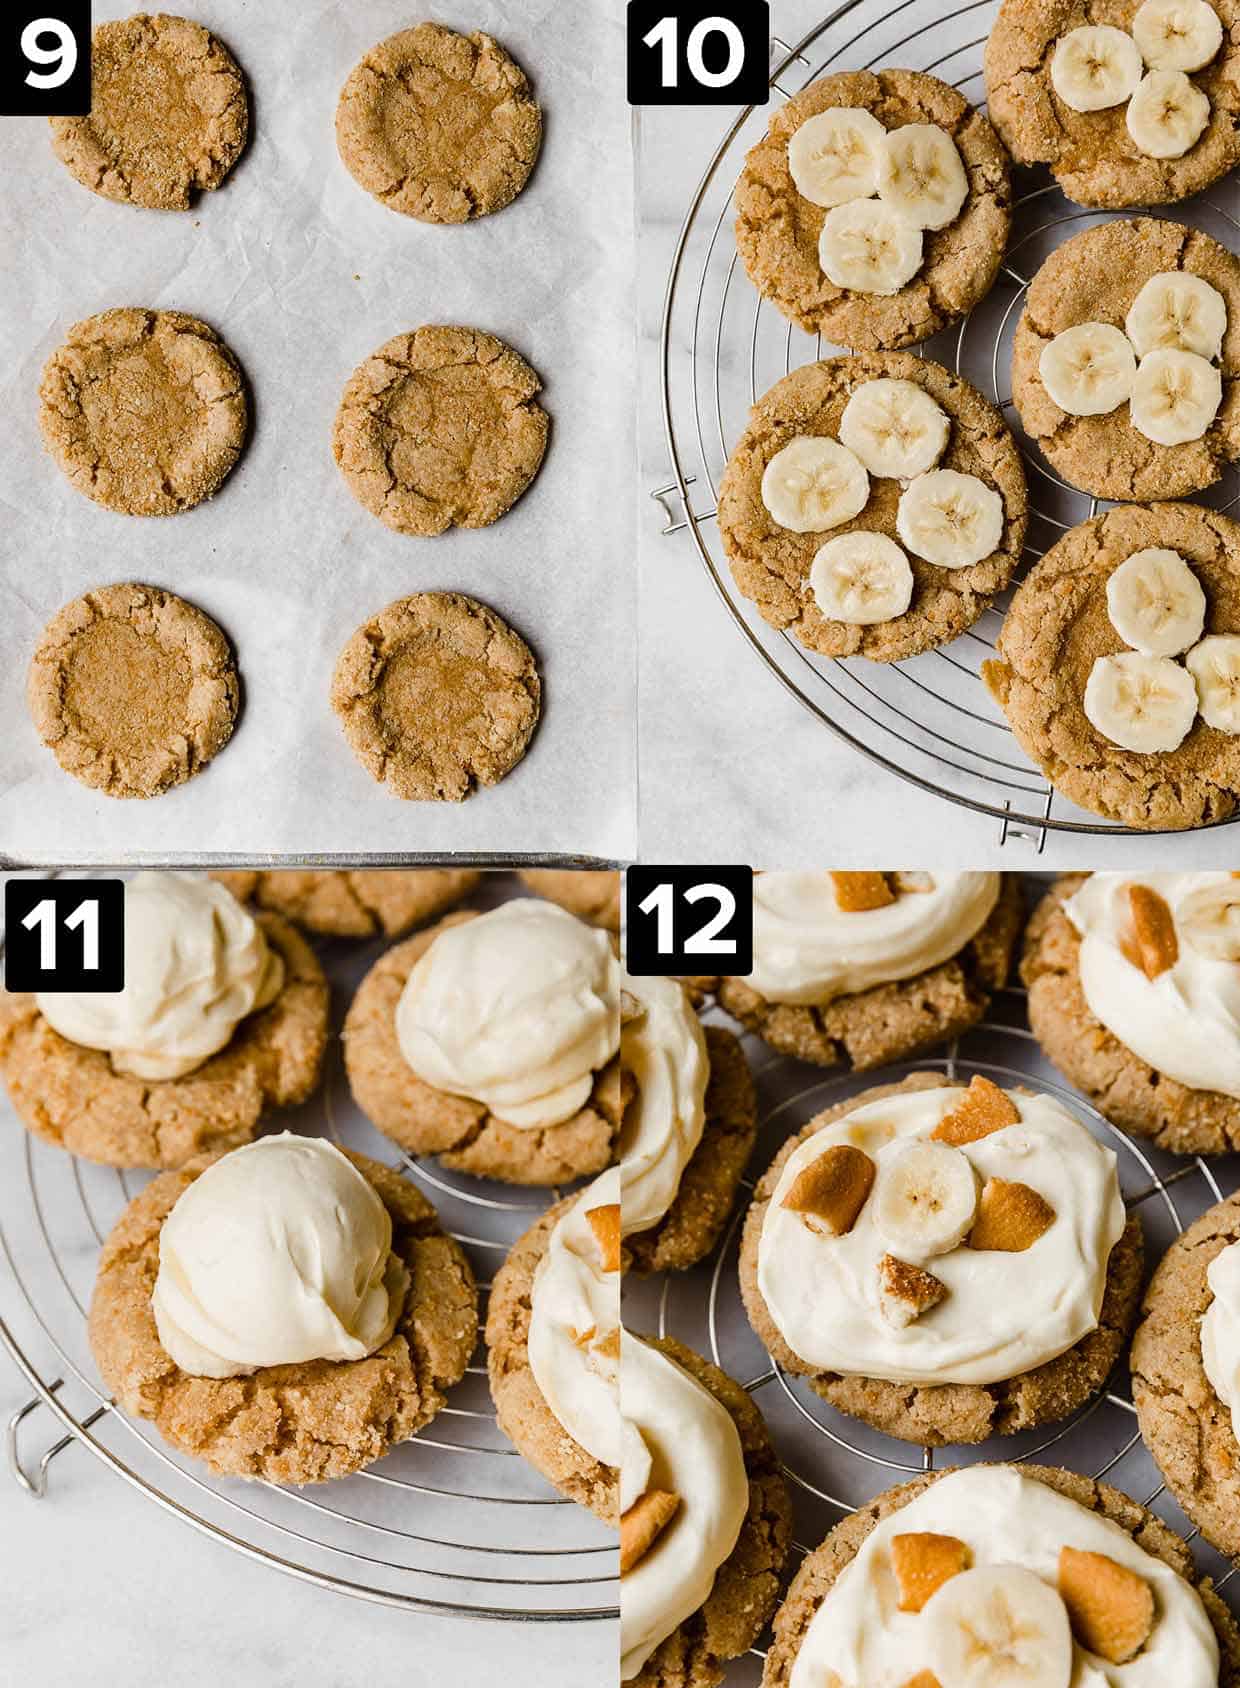 Banana Cream Pie Cookies process photos: top left to bottom right, six cookies on baking sheet, banana slices on top of the cookies, banana cream filling on the cookies, finished cookies with topping and Nilla Wafer chunks.